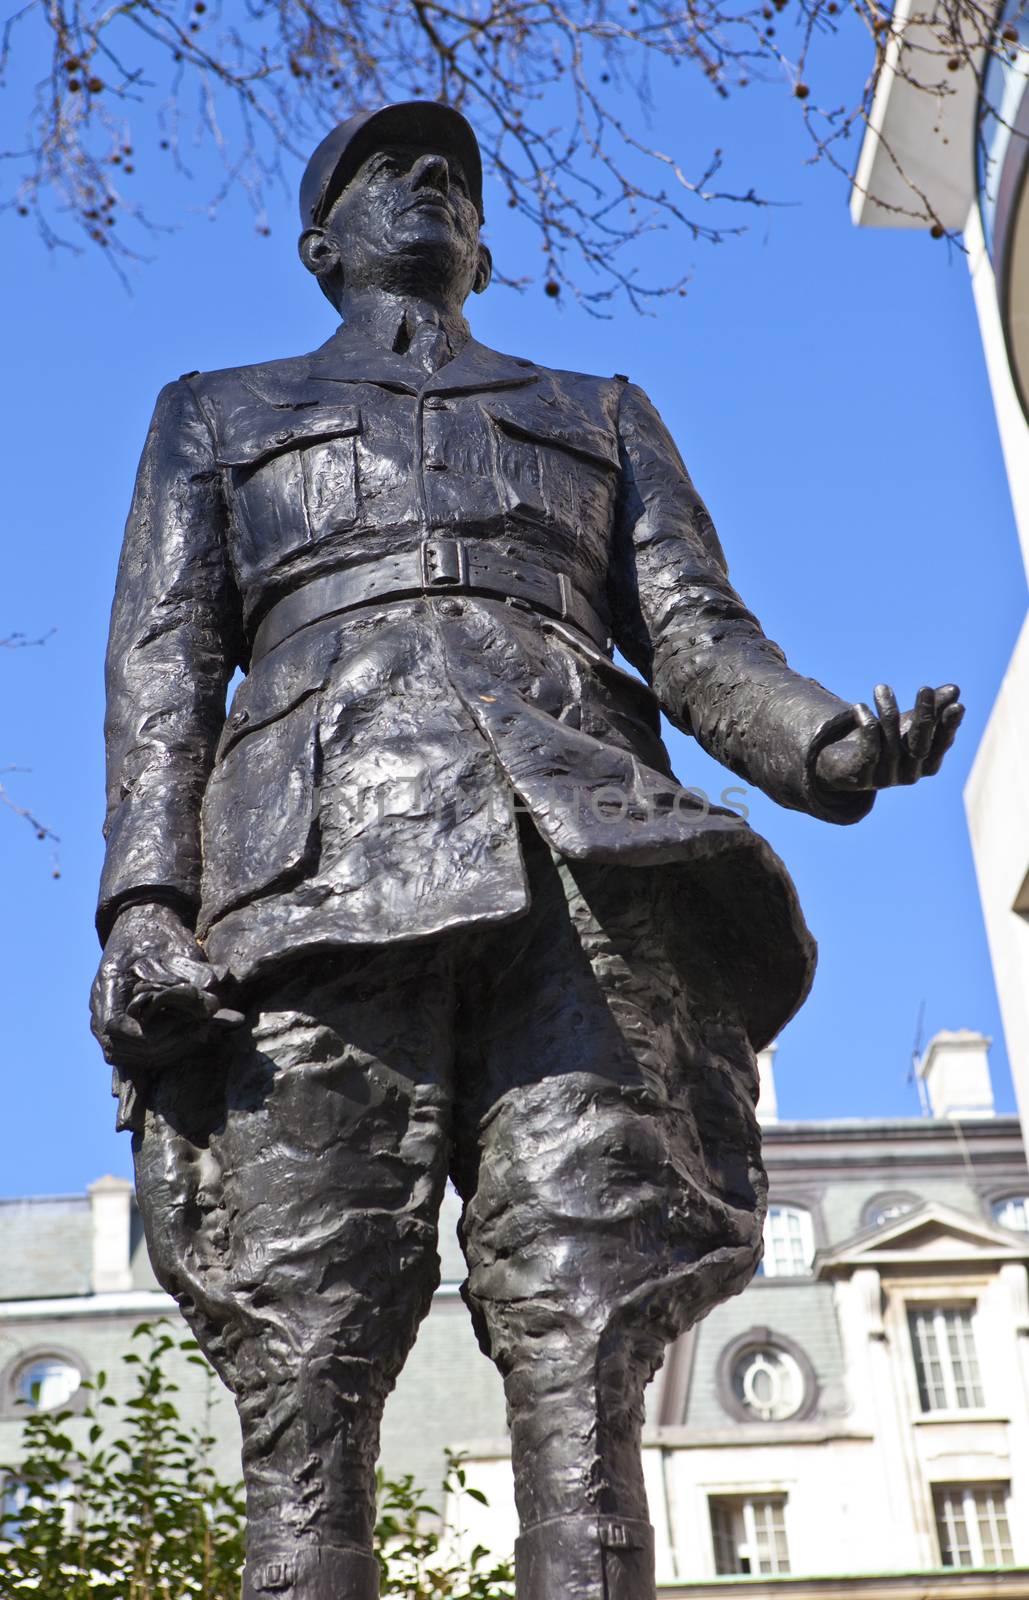 Statue of General Charles De Gaulle situated in Carlton Gardens in London.